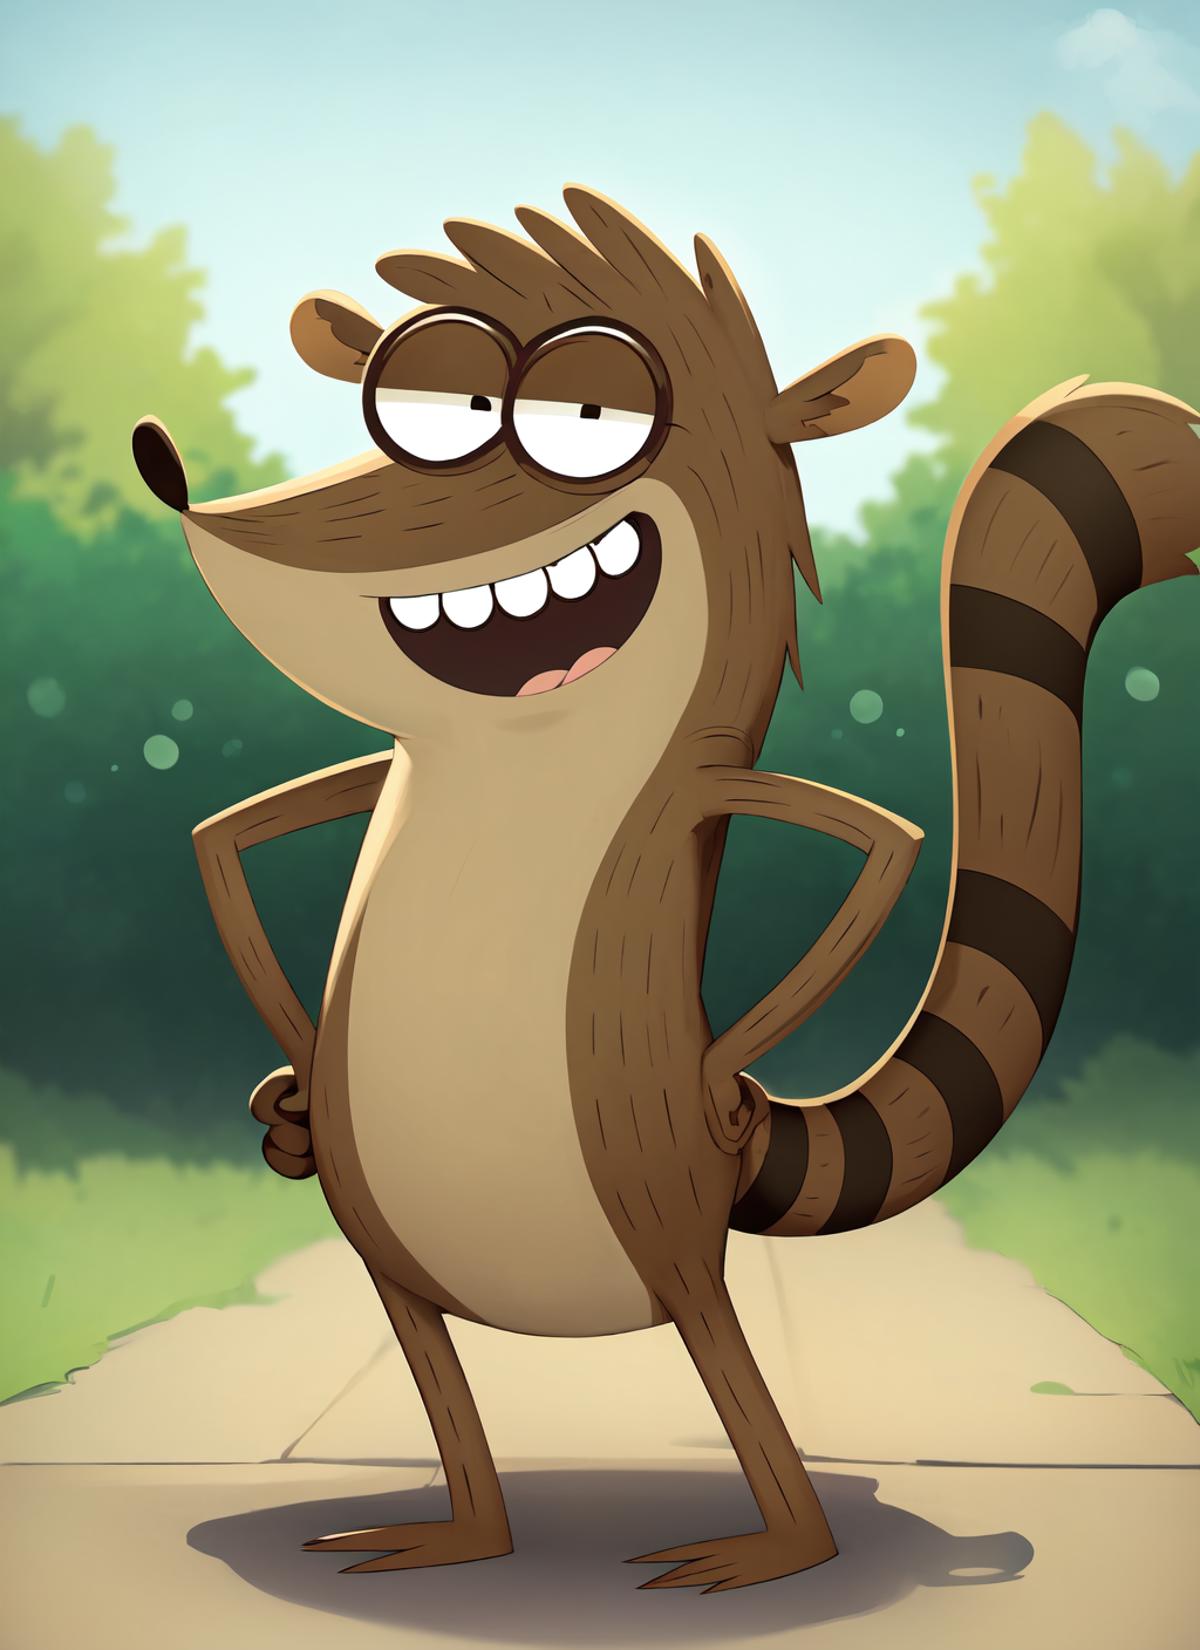 Rigby (Regular Show) image by FinalEclipse